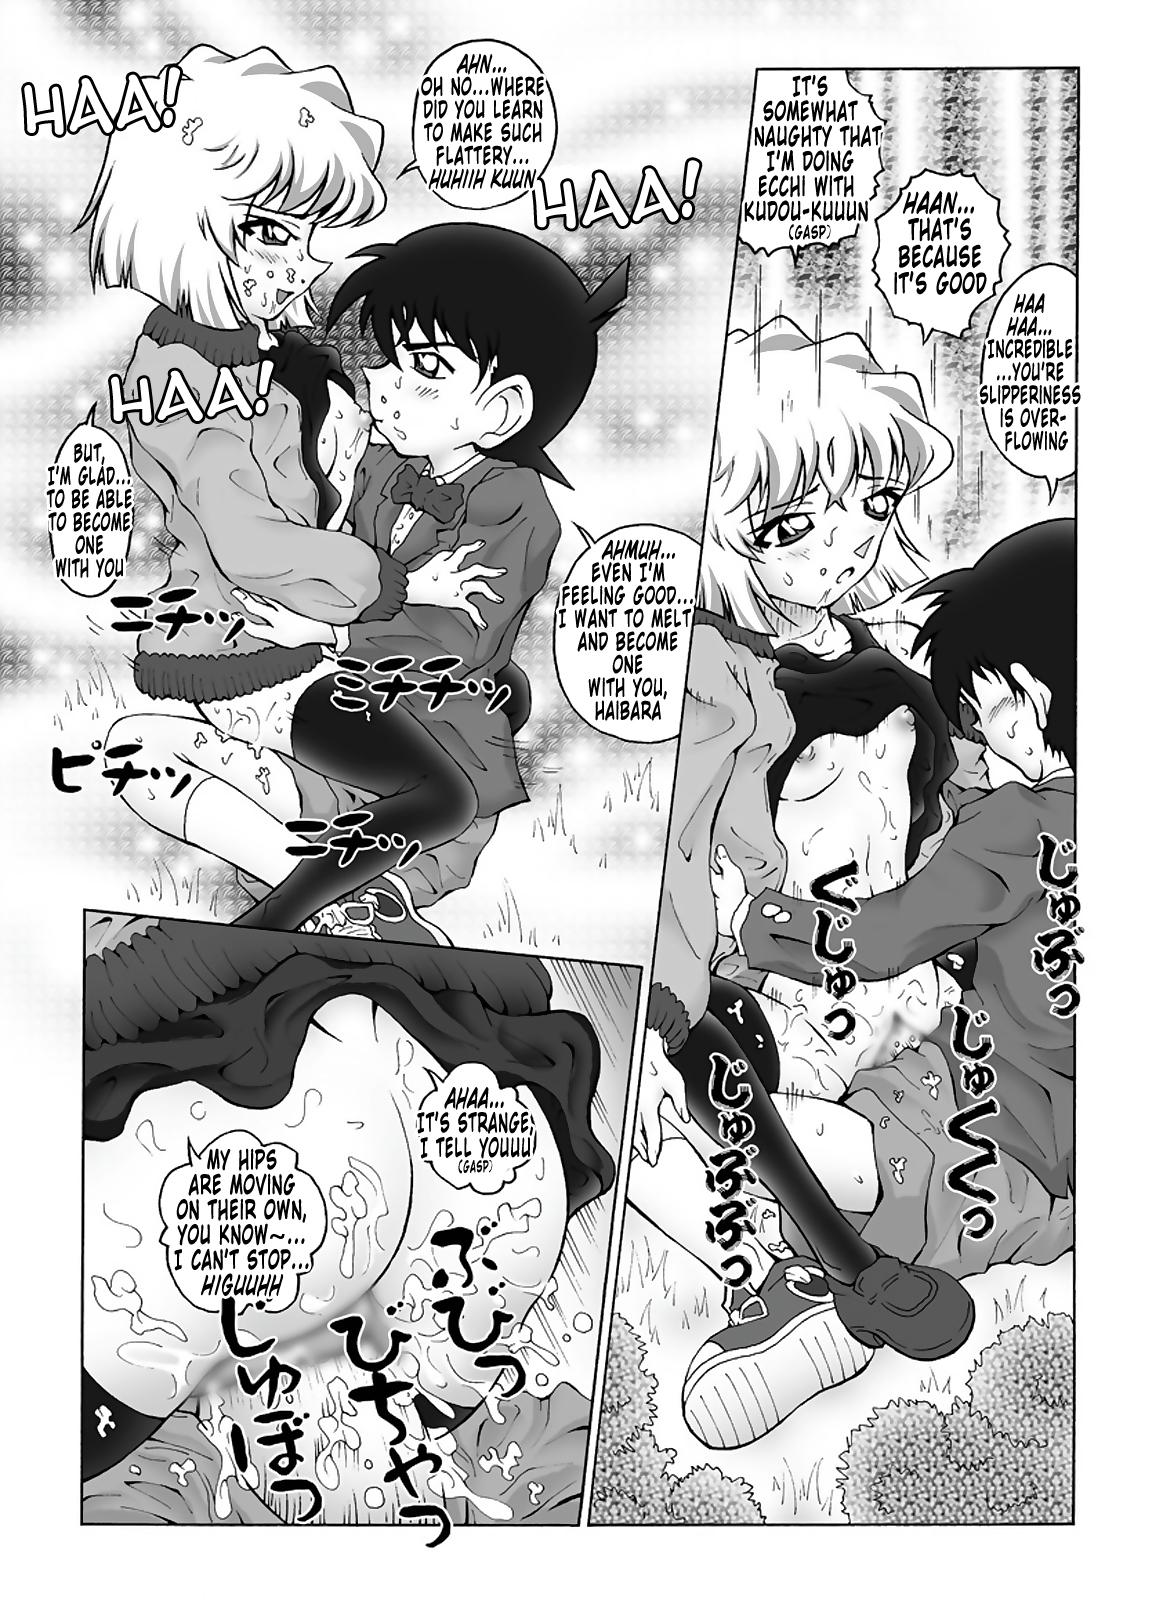 Bumbling Detective Conan - File 5: The Case of The Confrontation with The Black Organiztion 13